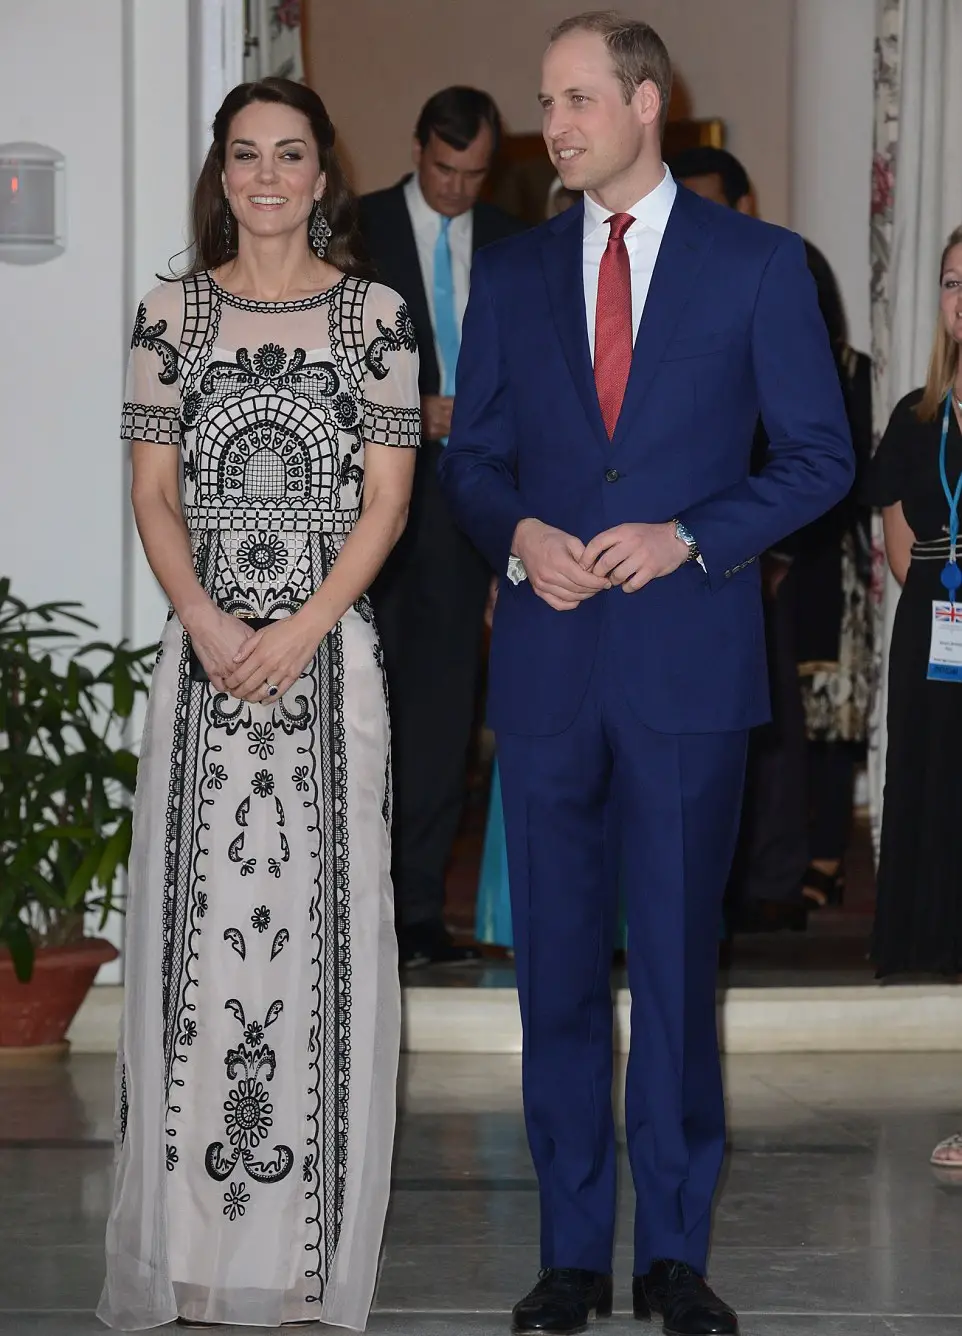 The Duke and Duchess of Cambridge visited India and Bhutan in April 2016